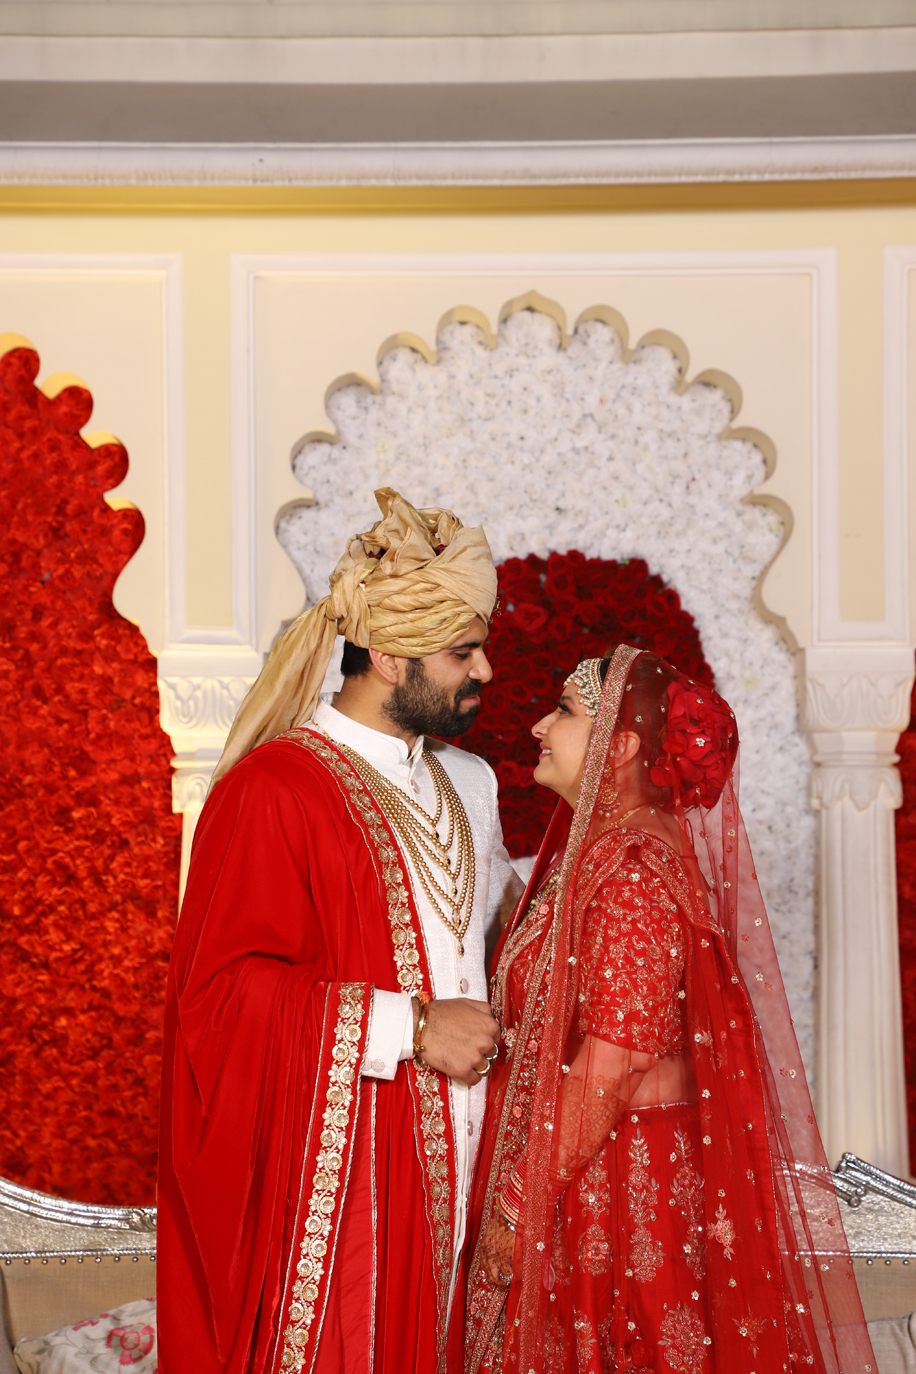 This Jaipur wedding at a palace property impressed all with its standout decor